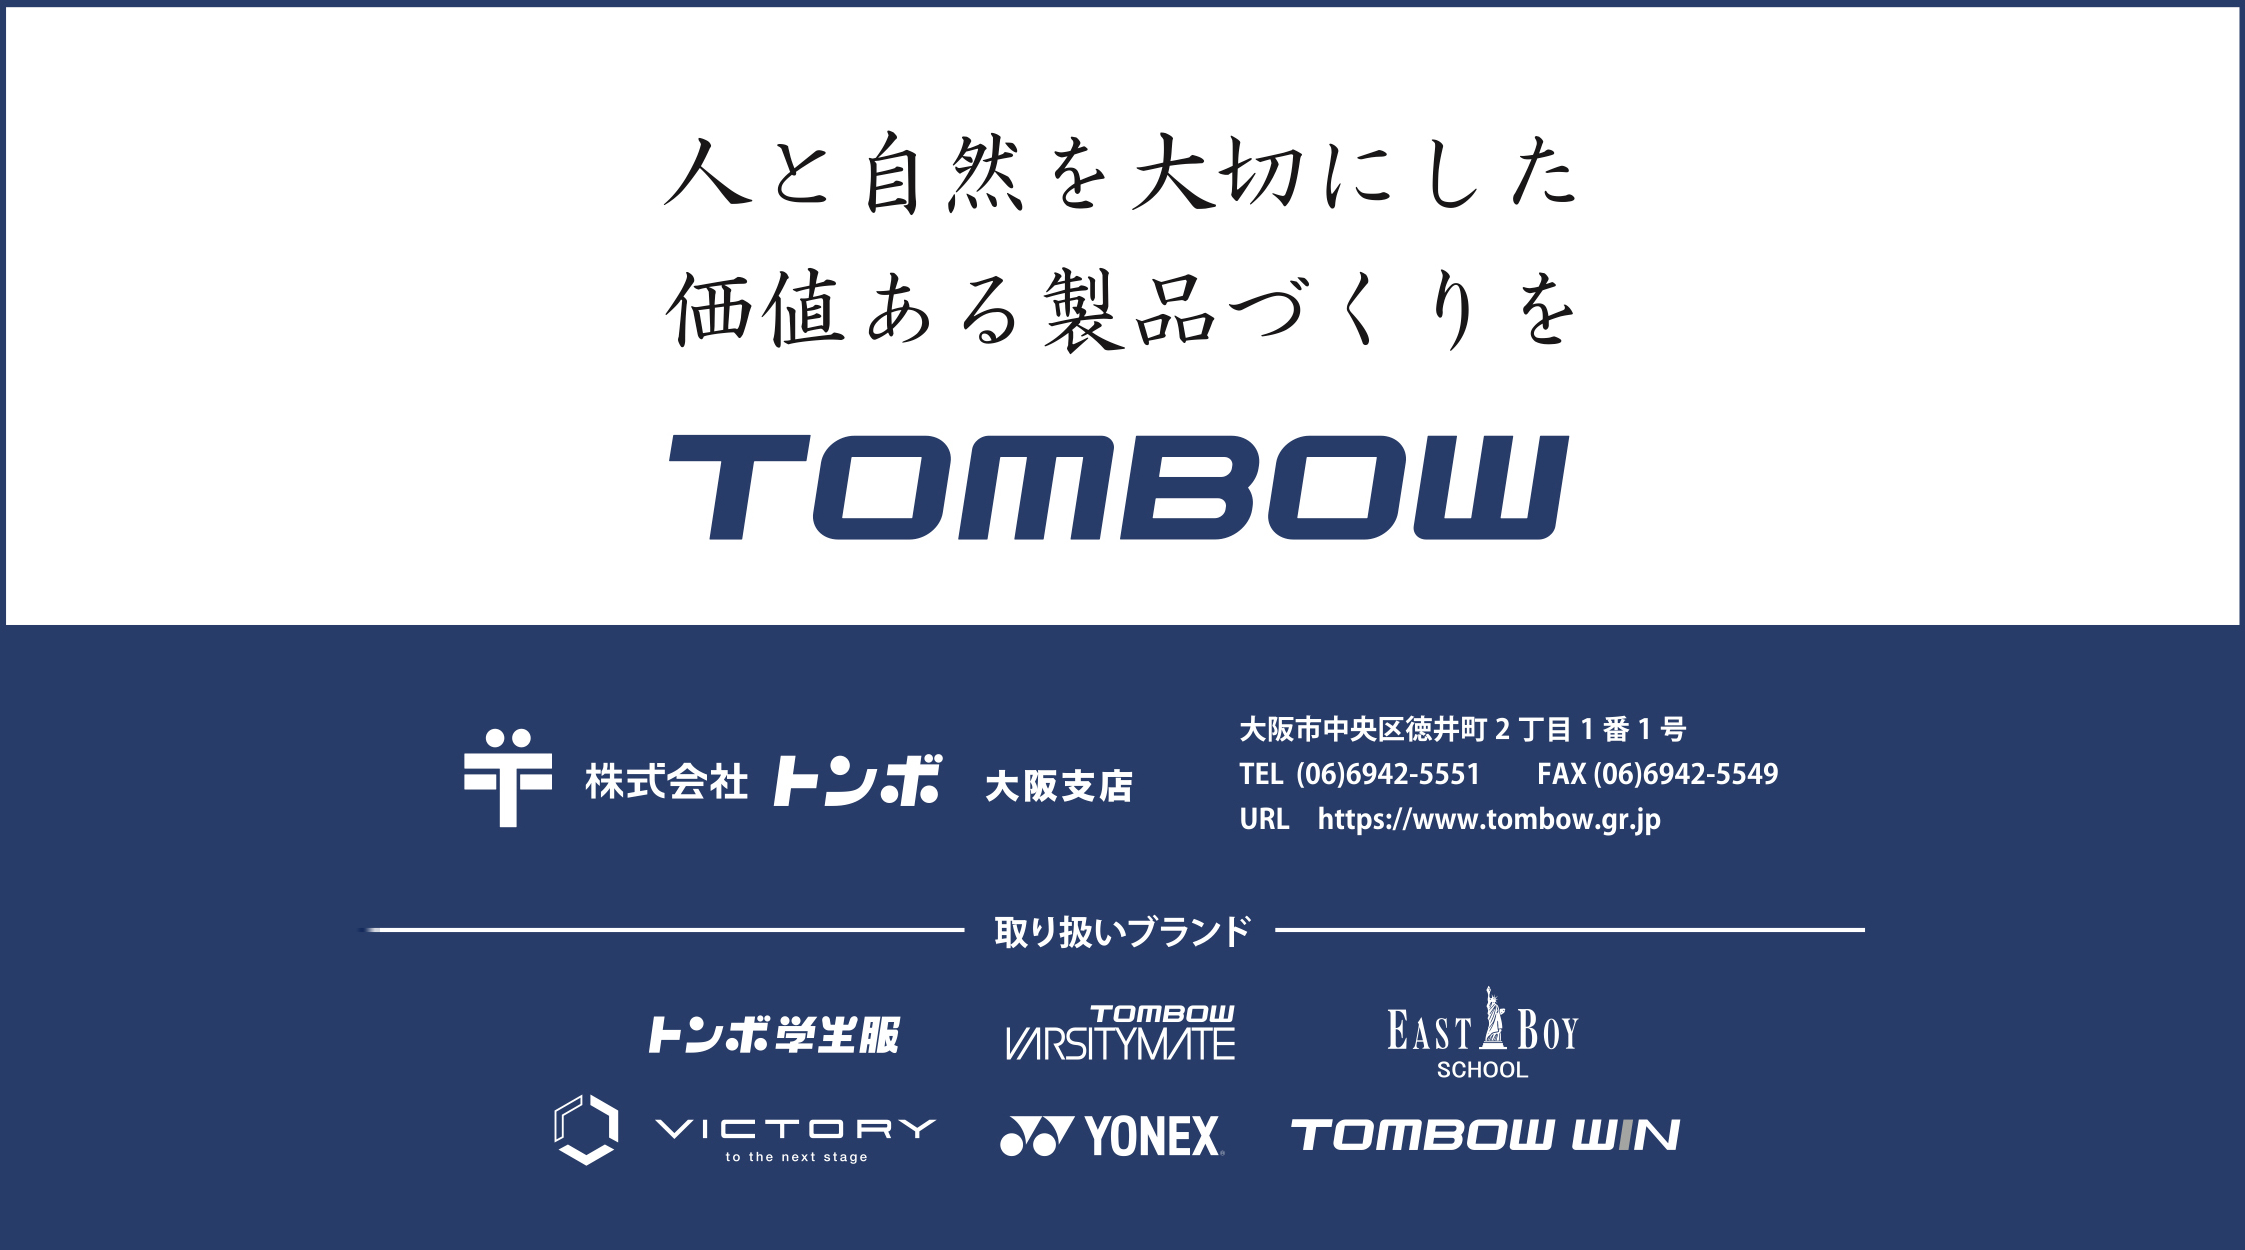 More about tombo